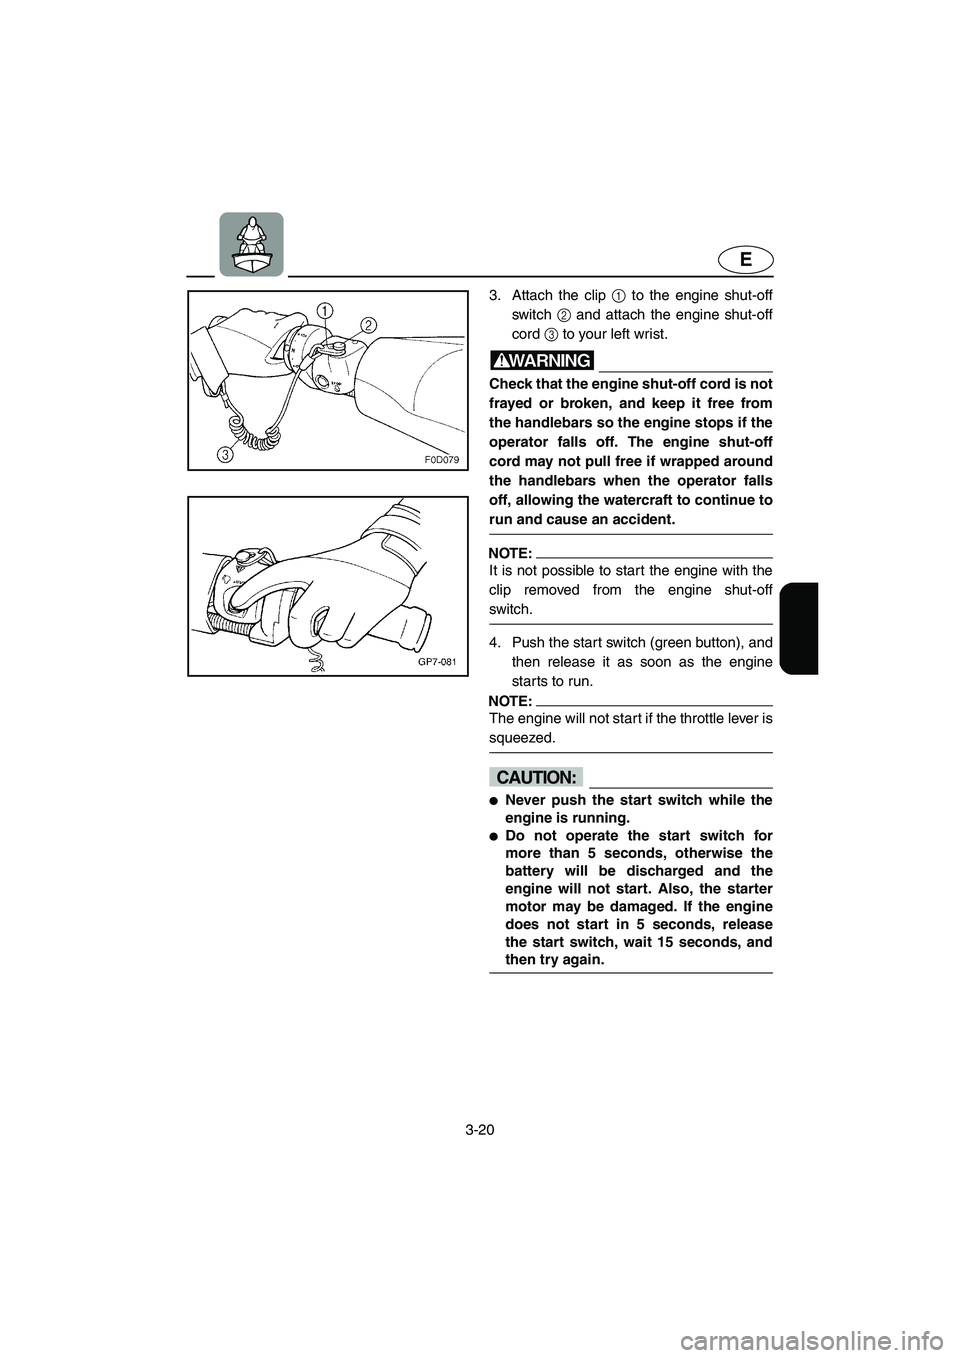 YAMAHA FX HO 2006  Owners Manual 3-20
E
3. Attach the clip 1 to the engine shut-off
switch 2 and attach the engine shut-off
cord 3 to your left wrist.
WARNING@ Check that the engine shut-off cord is not
frayed or broken, and keep it 